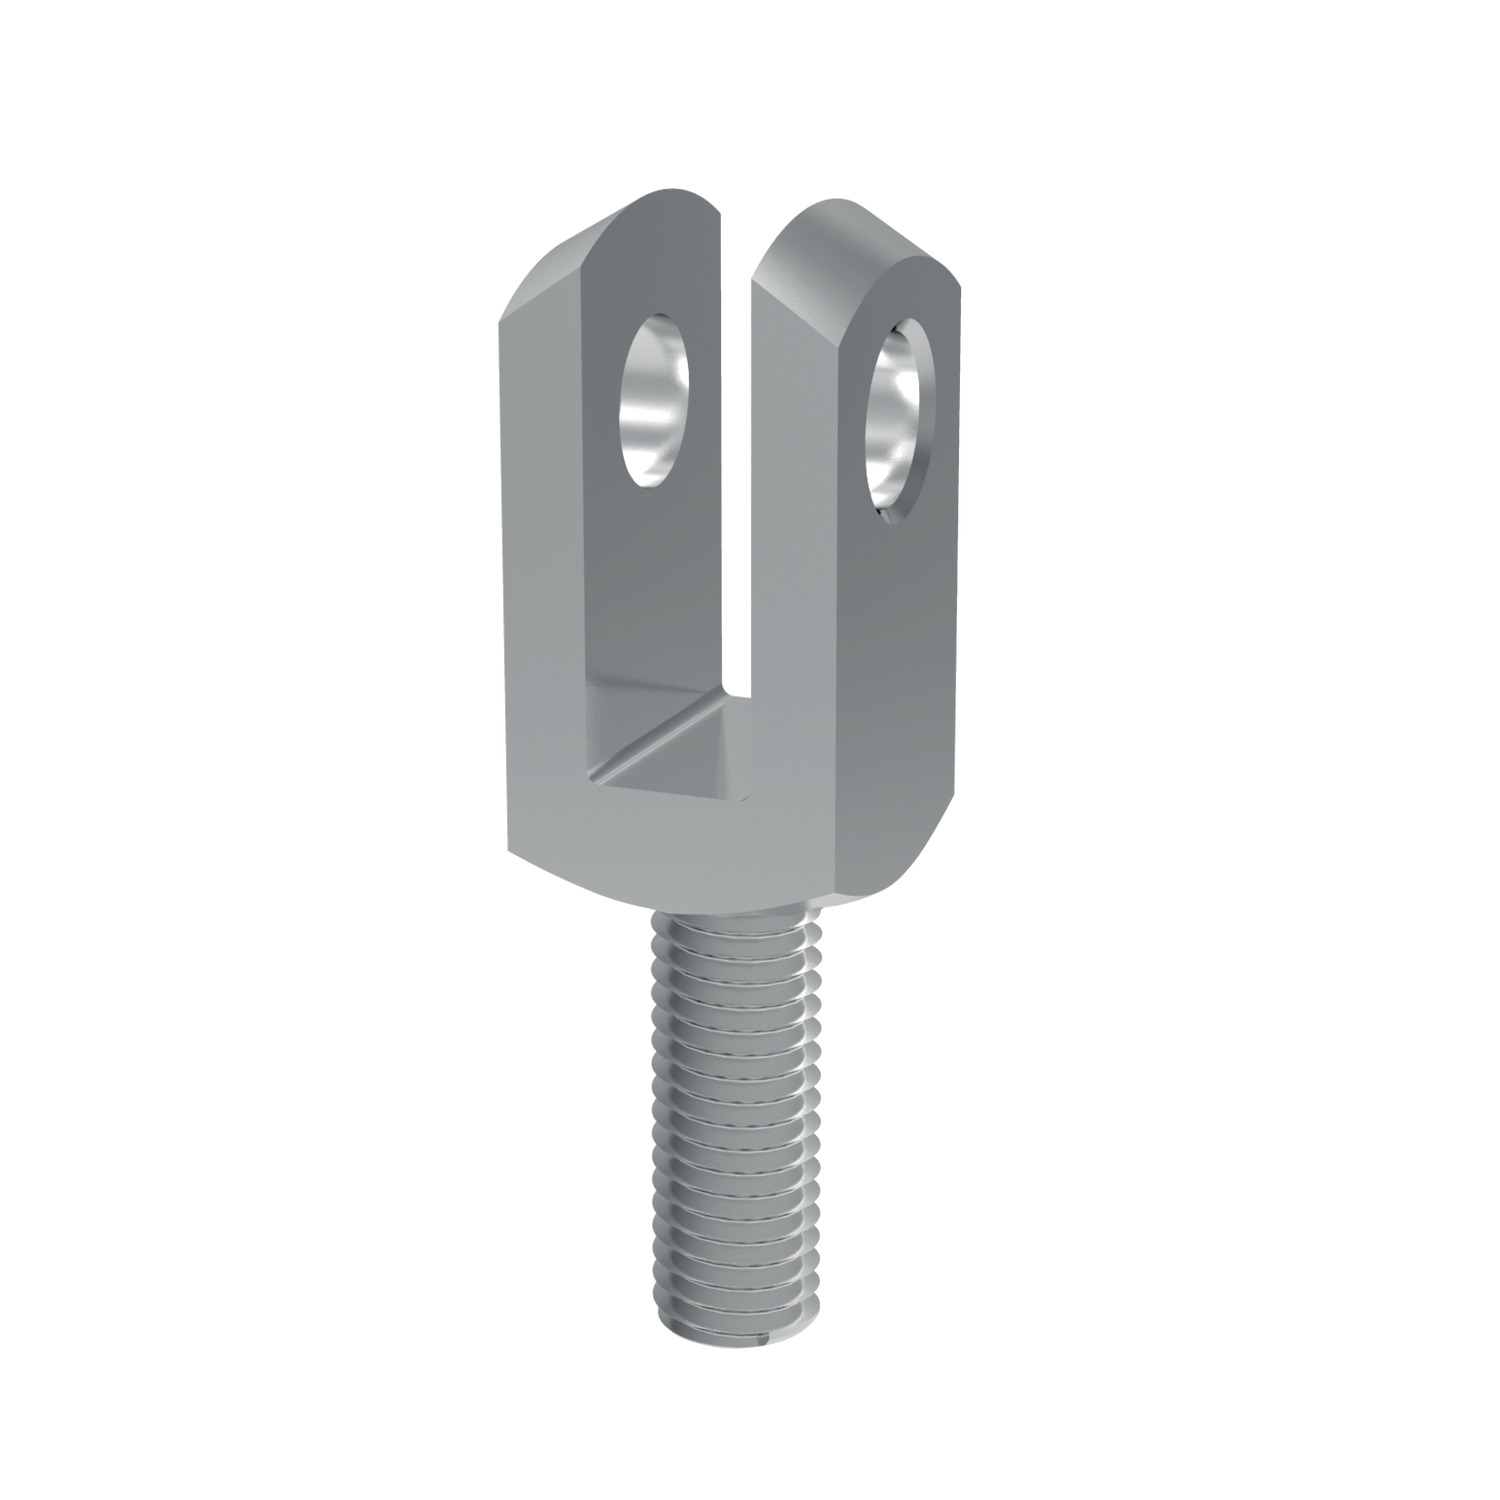 65646.W0006 Male Clevis Joints - Stainless steel. 